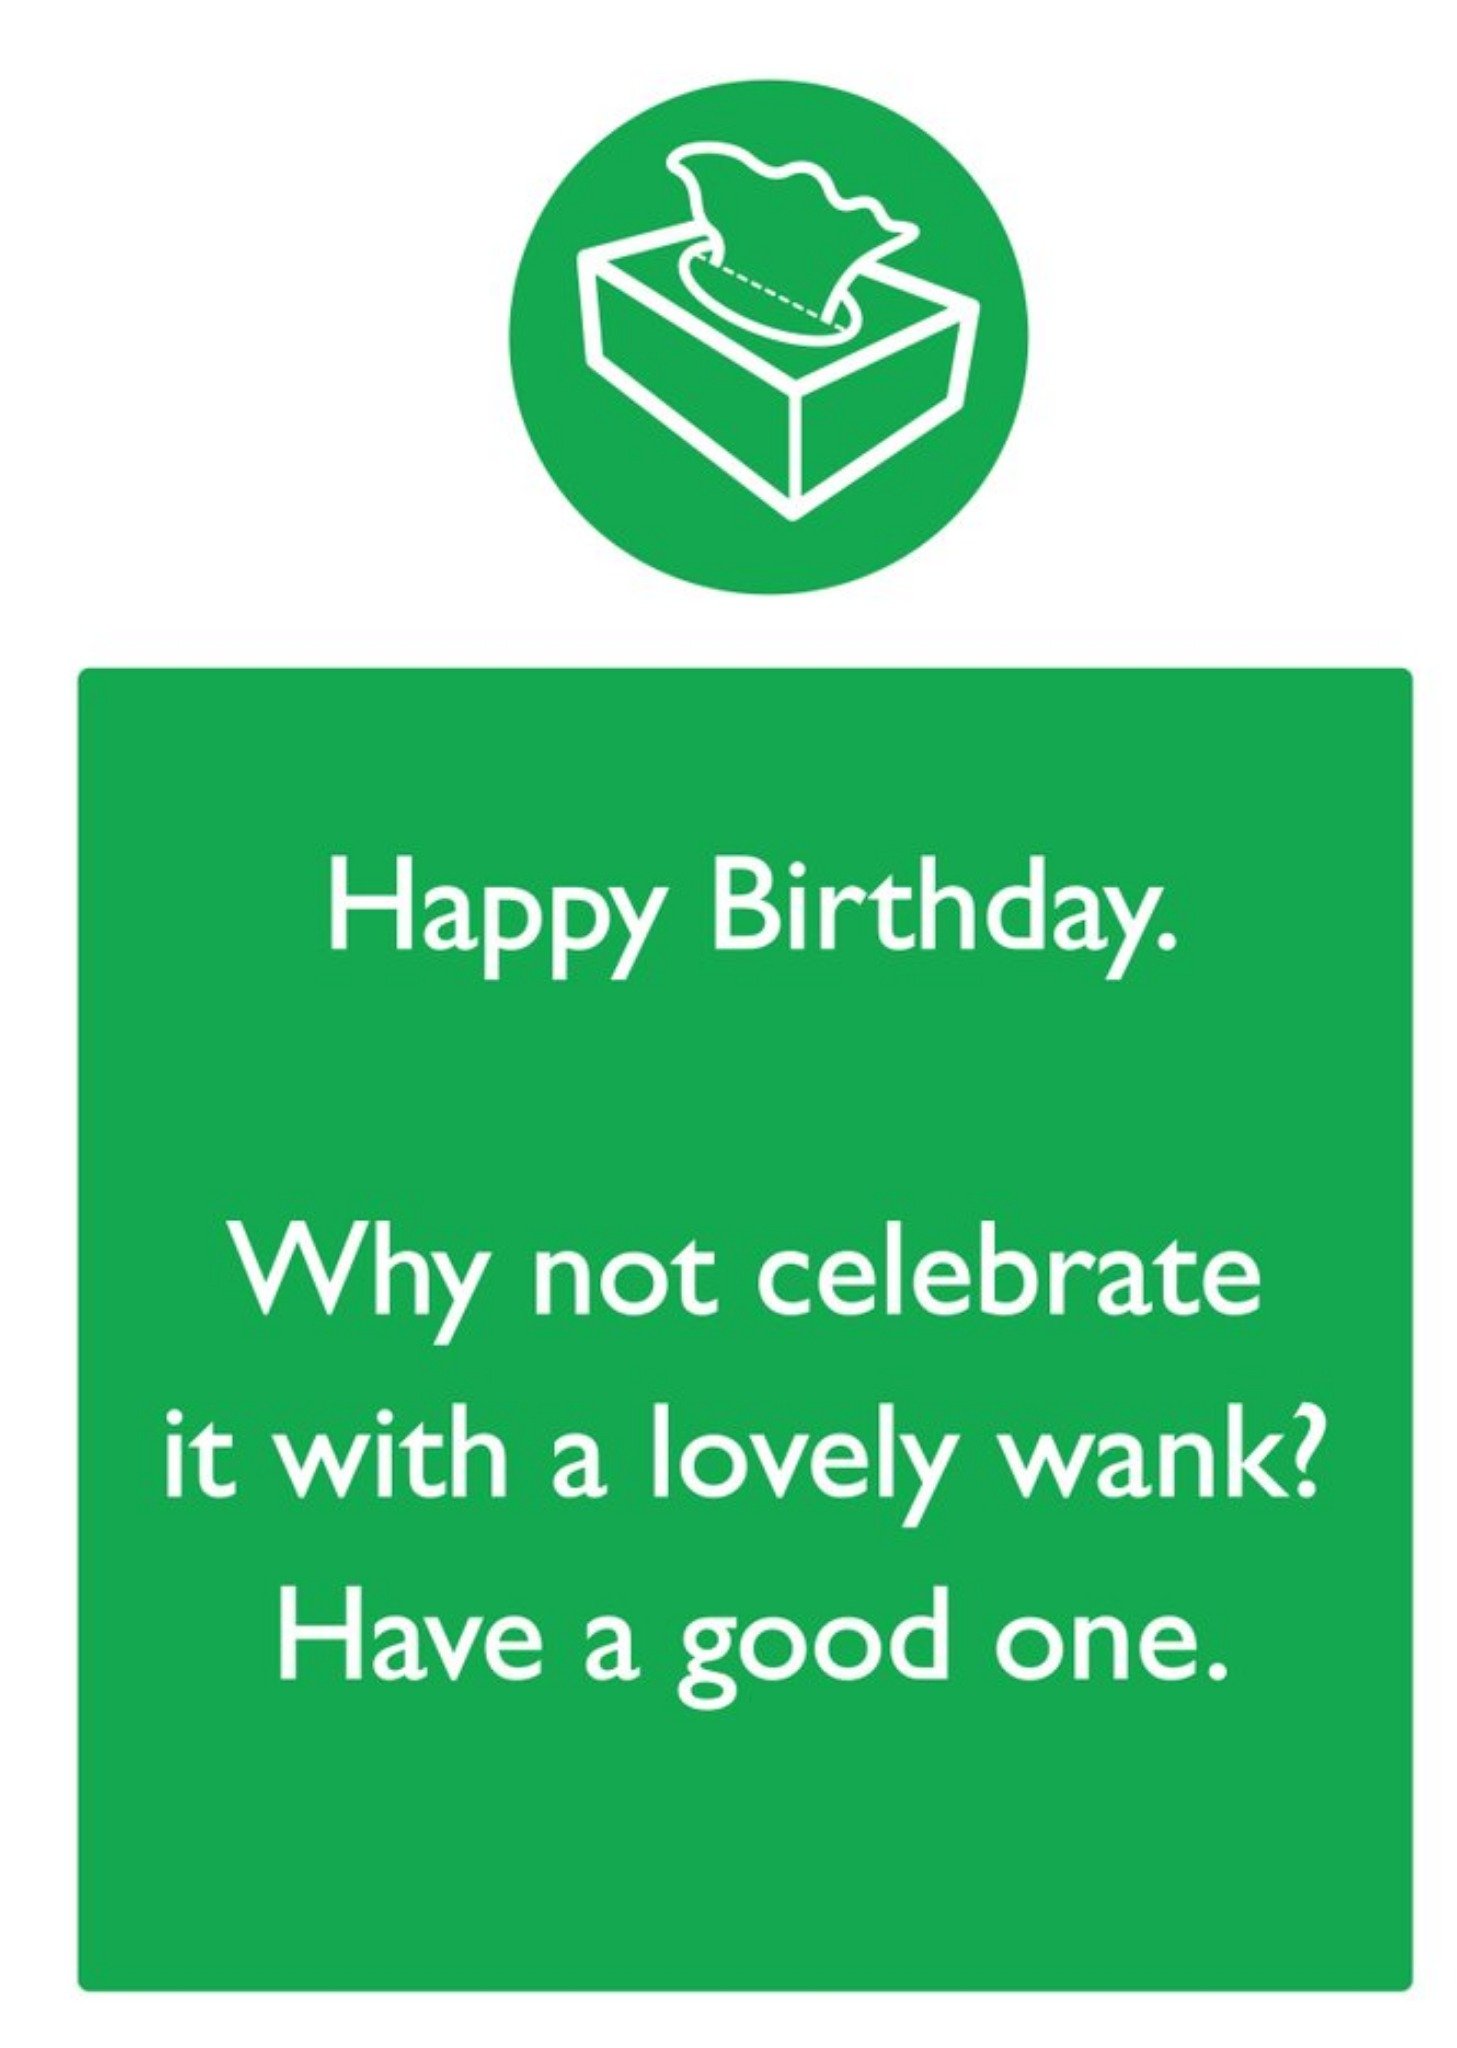 Brainbox Candy Rude Funny Happy Birthday Celebreate With A Lovely Wank Card Ecard